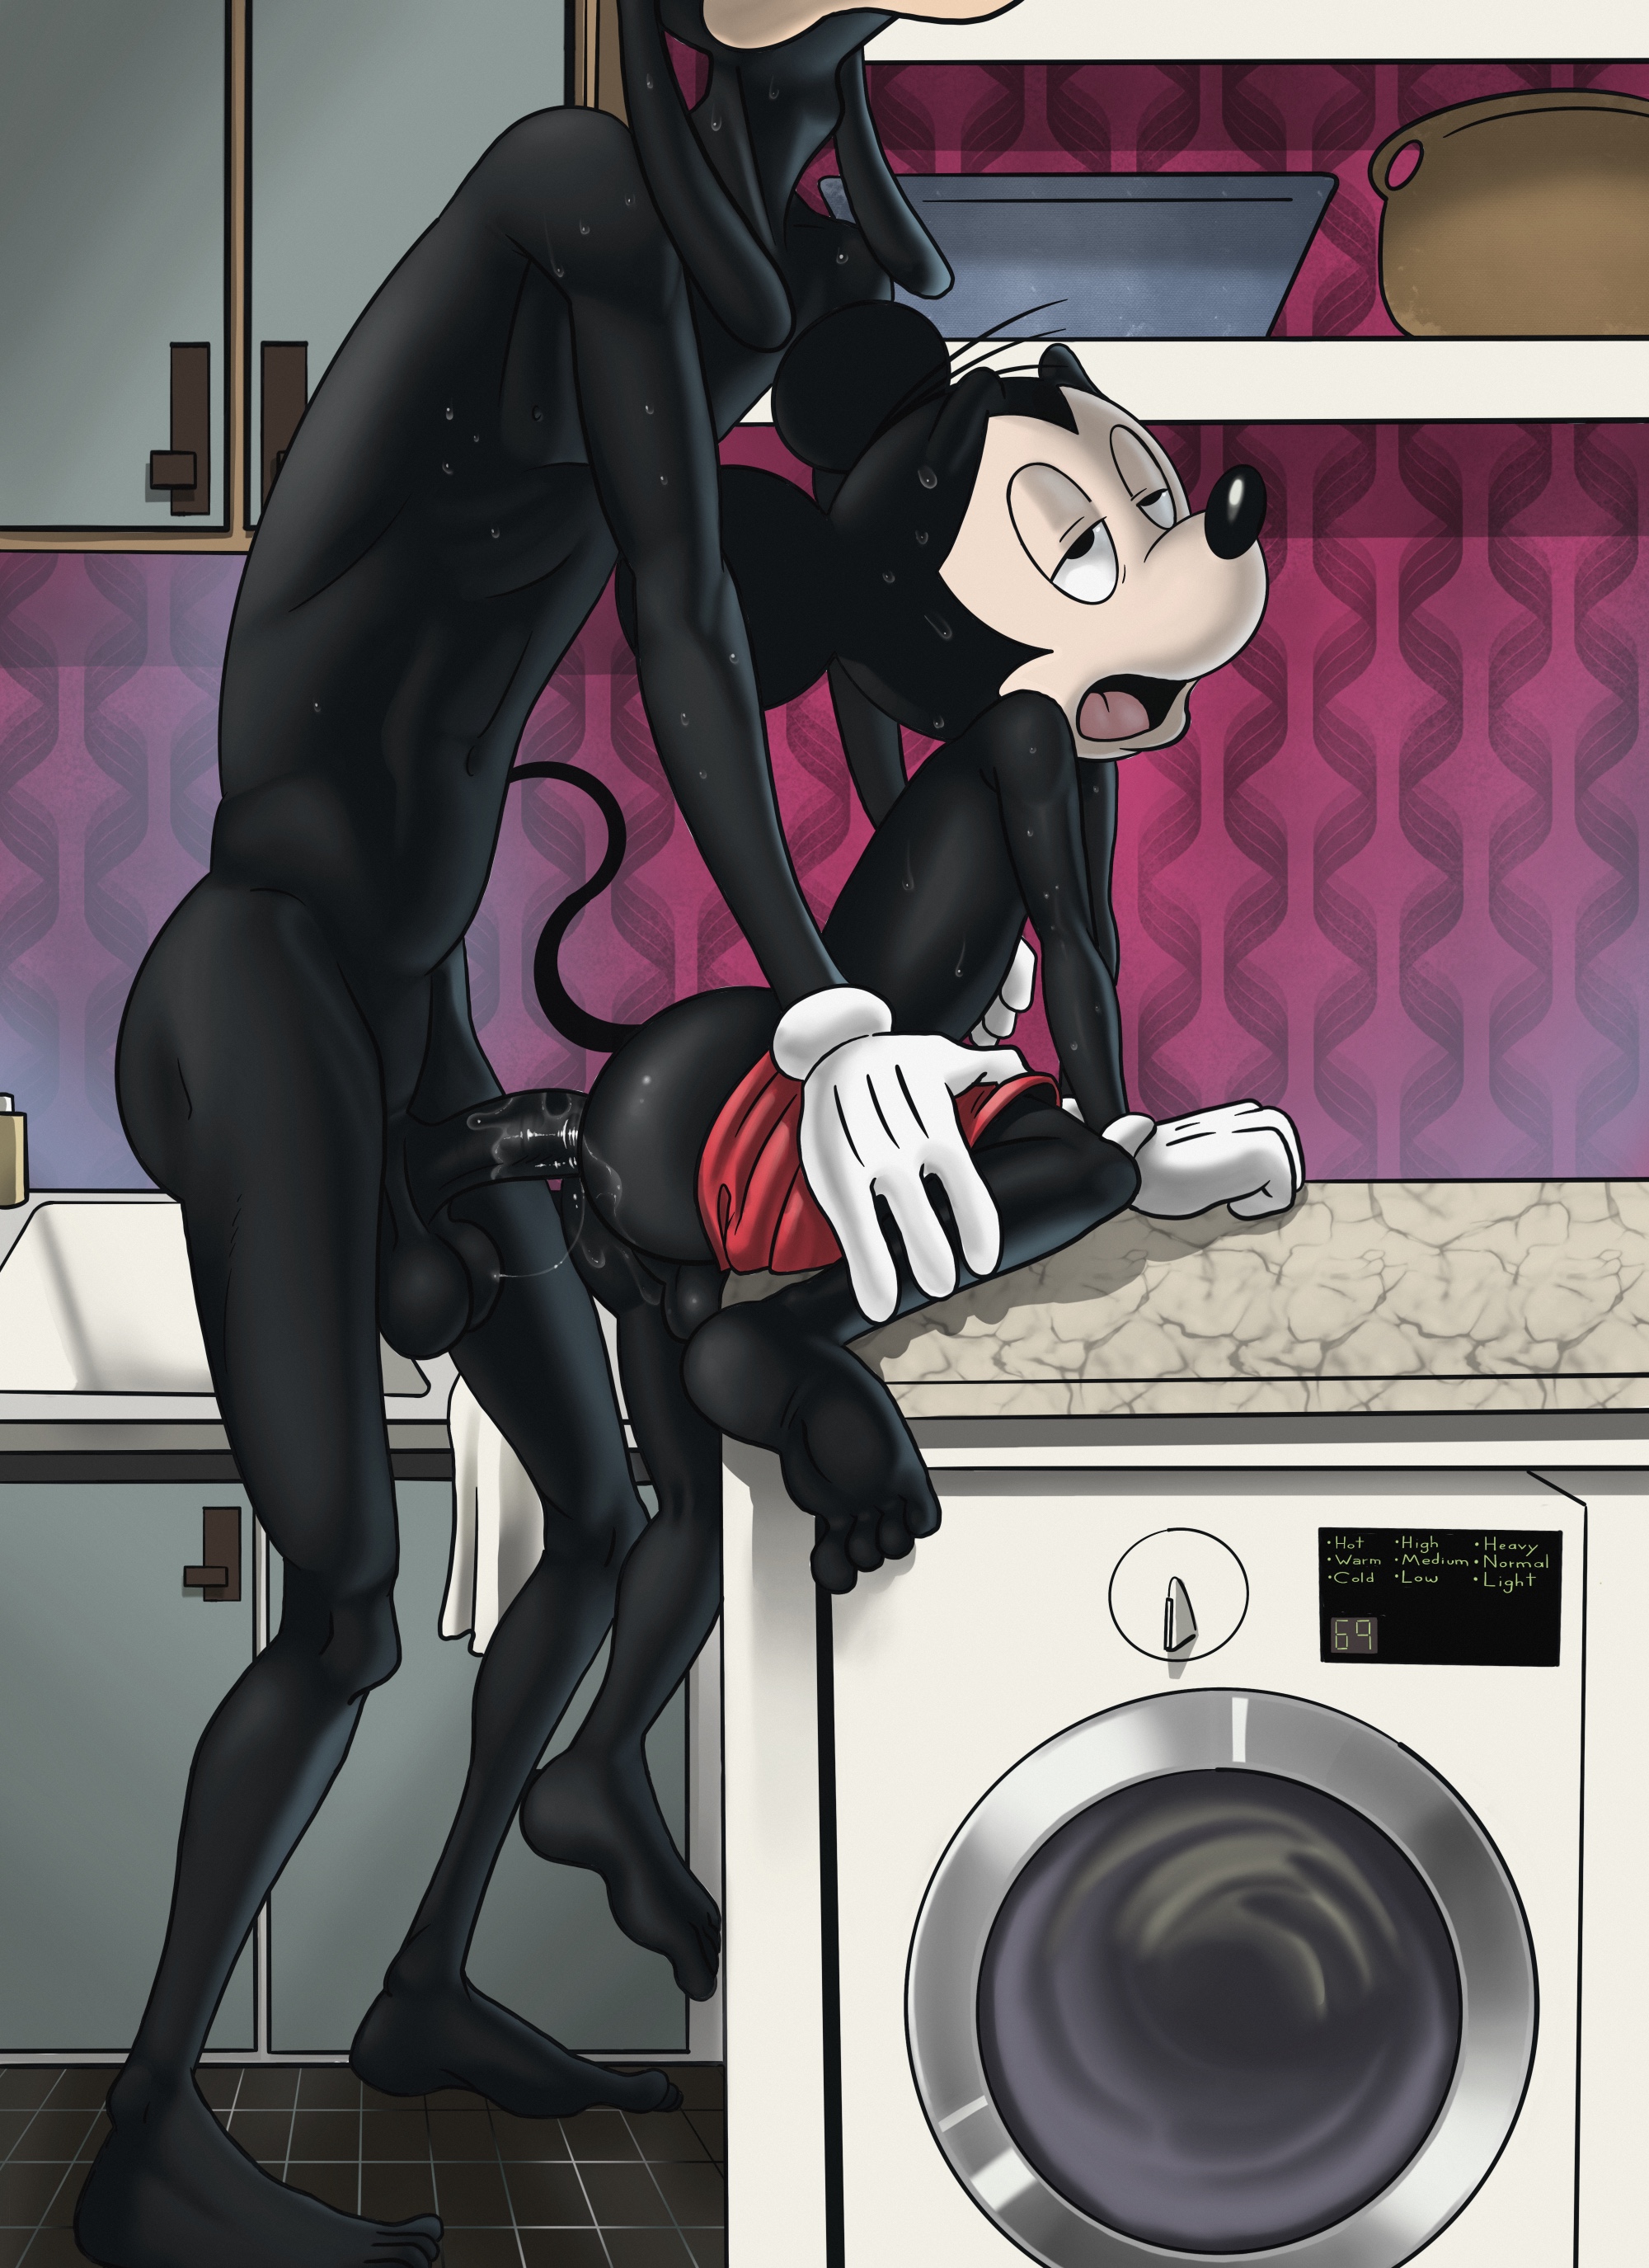 Porn mickey mouse